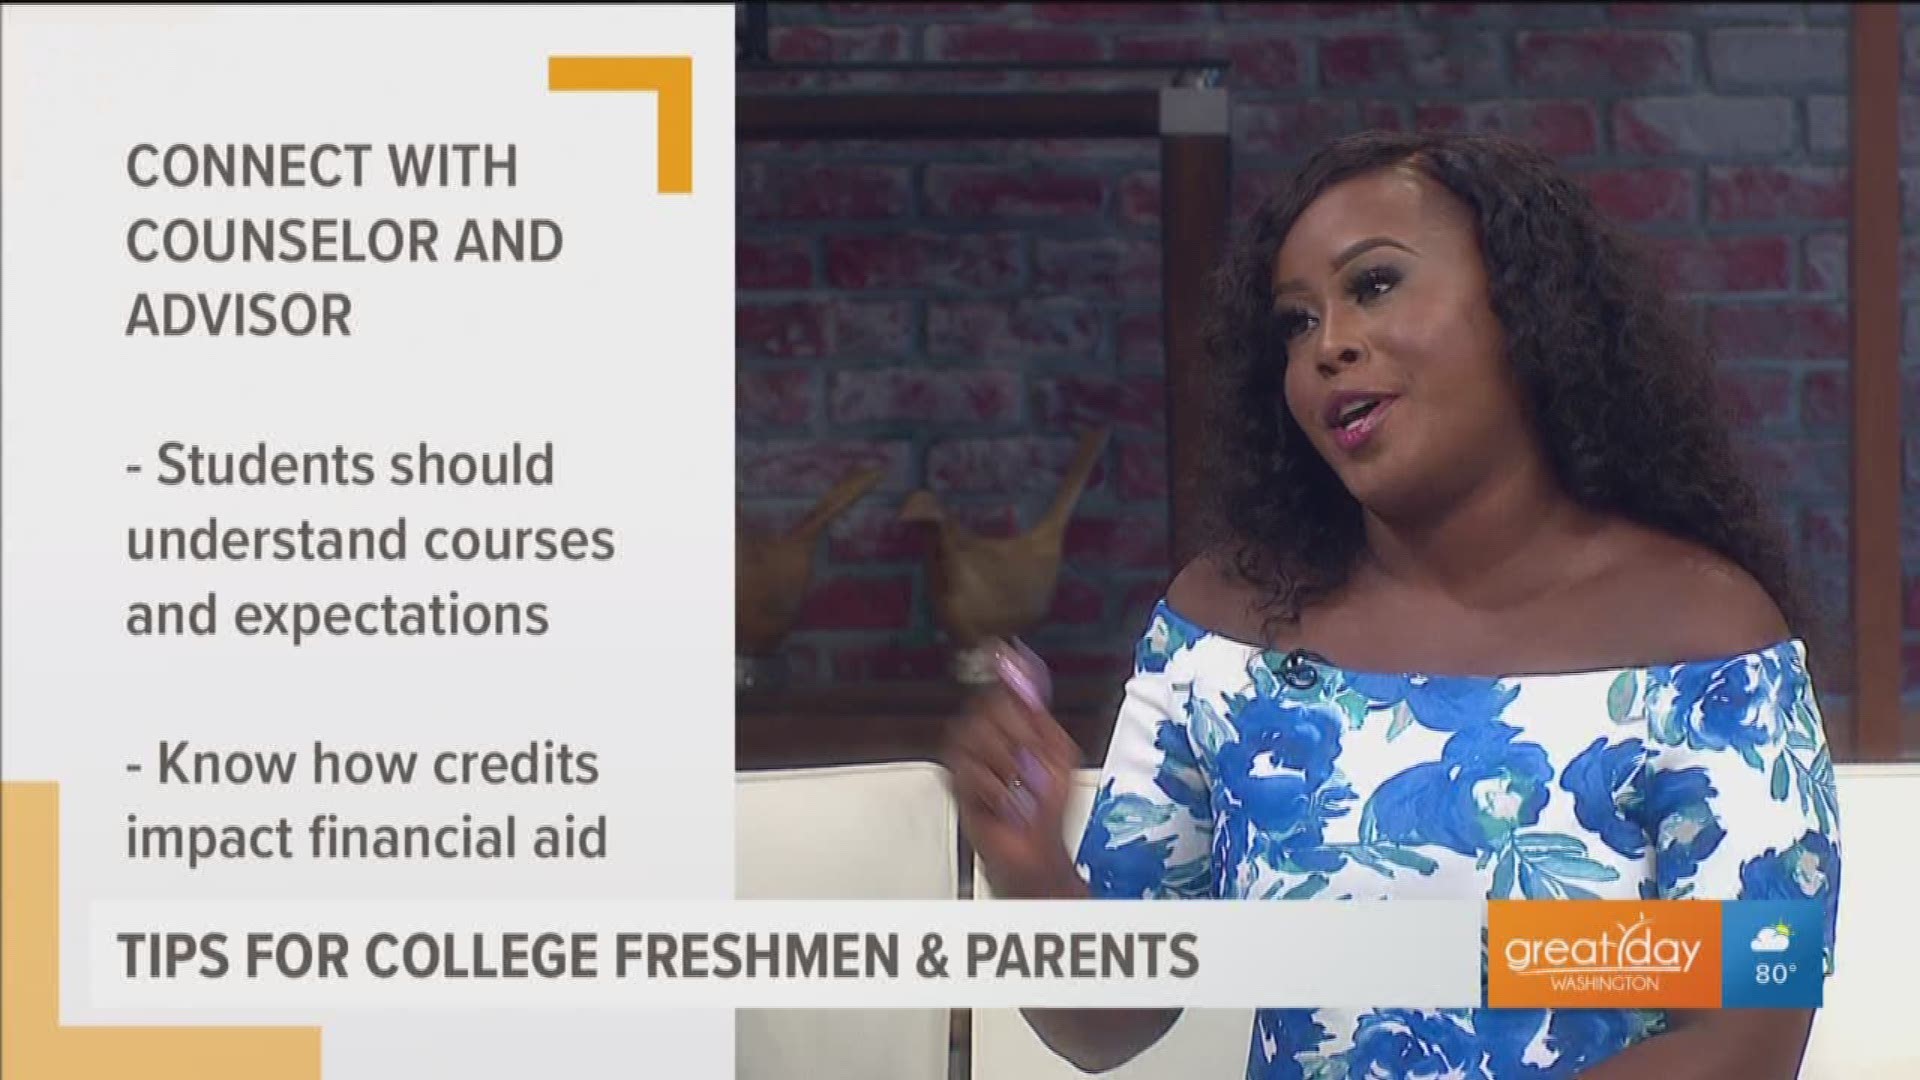 Jessica Brown, founder of Collegegurl.com shares helpful tips on saving money in college, from meal plans to scholarships, she's got the ins and outs on saving big bucks.